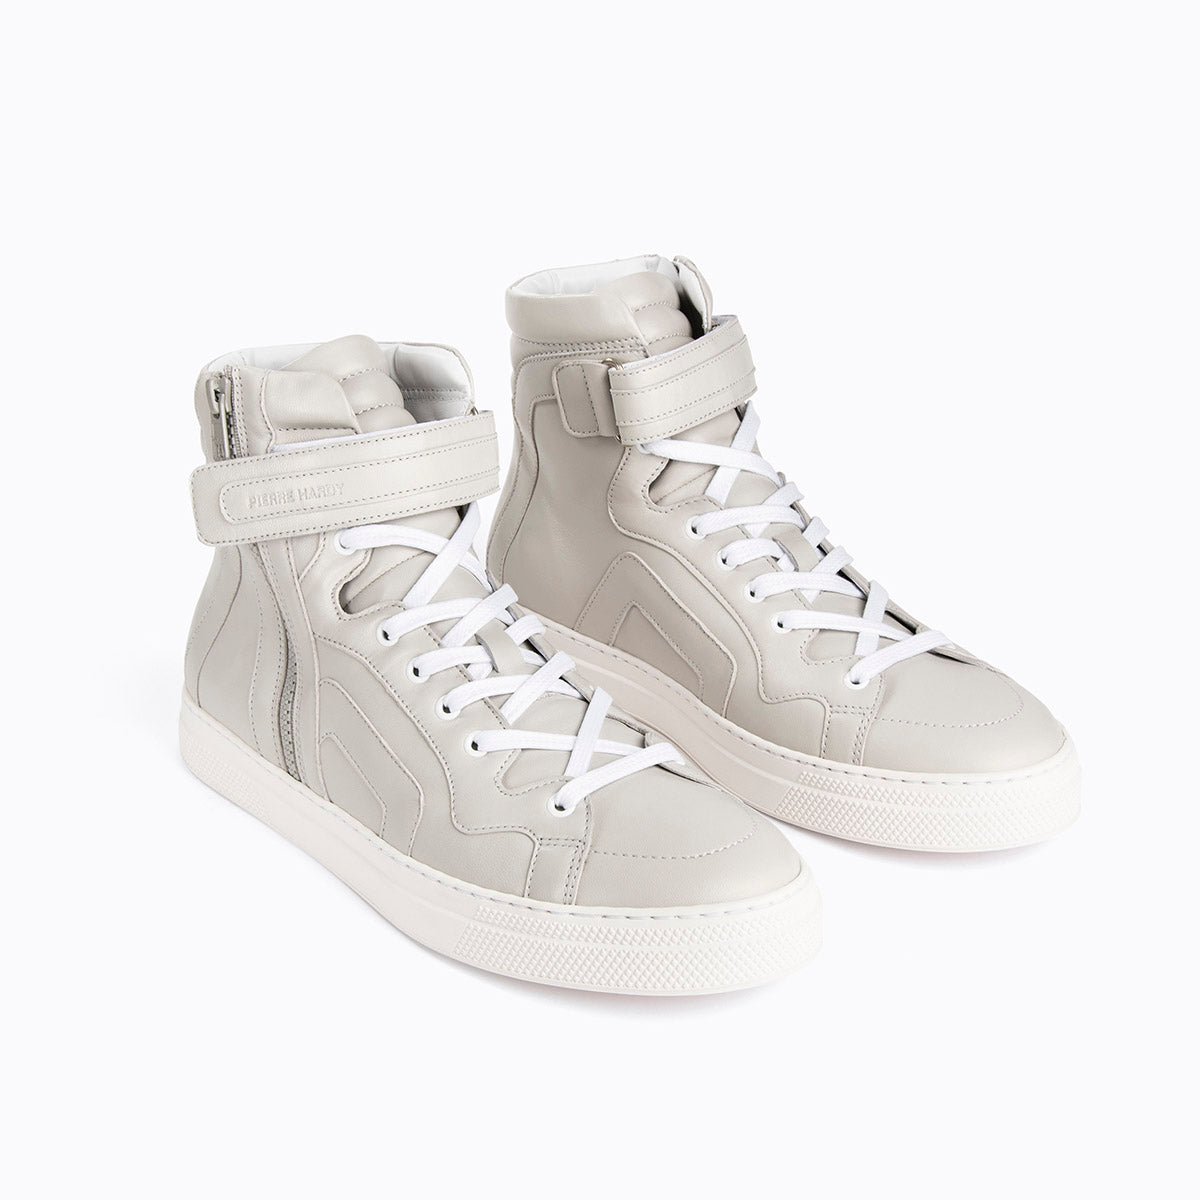 112 high-top sneakers for men in off-white leather — PIERRE HARDY